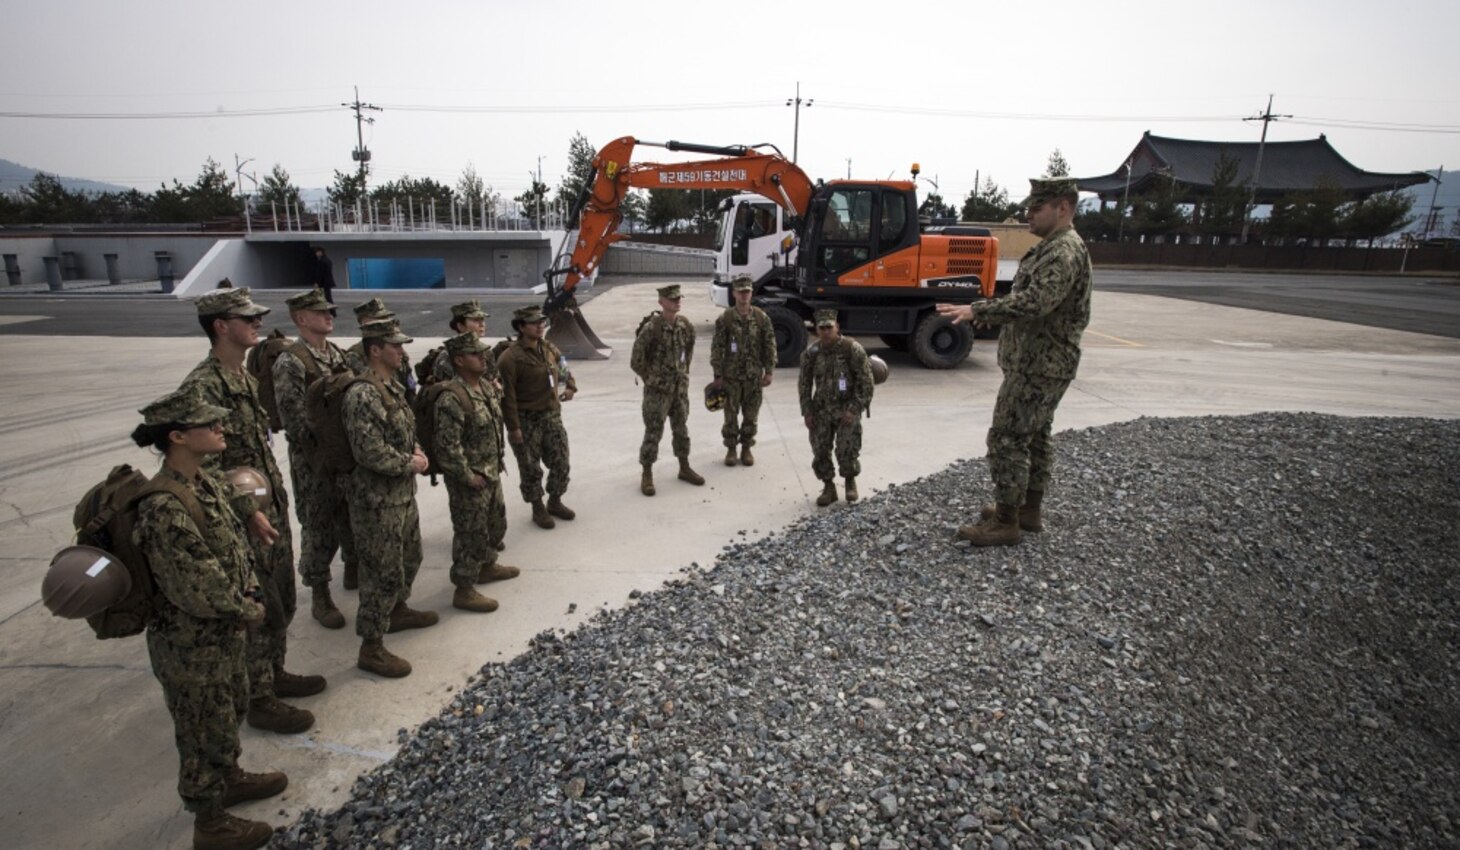 Lt.j.g. John Watkins, assigned to Naval Mobile Construction Battalion 5, addresses his Seabees about exercise Foal Eagle at the Republic of Korea (ROK) Naval Education and Training Command in Jinhae, ROK, March 13, 2017. Foal Eagle is an annual, bilateral training exercise designed to enhance the readiness of U.S. and ROK forces and their ability to work together during a crisis. 